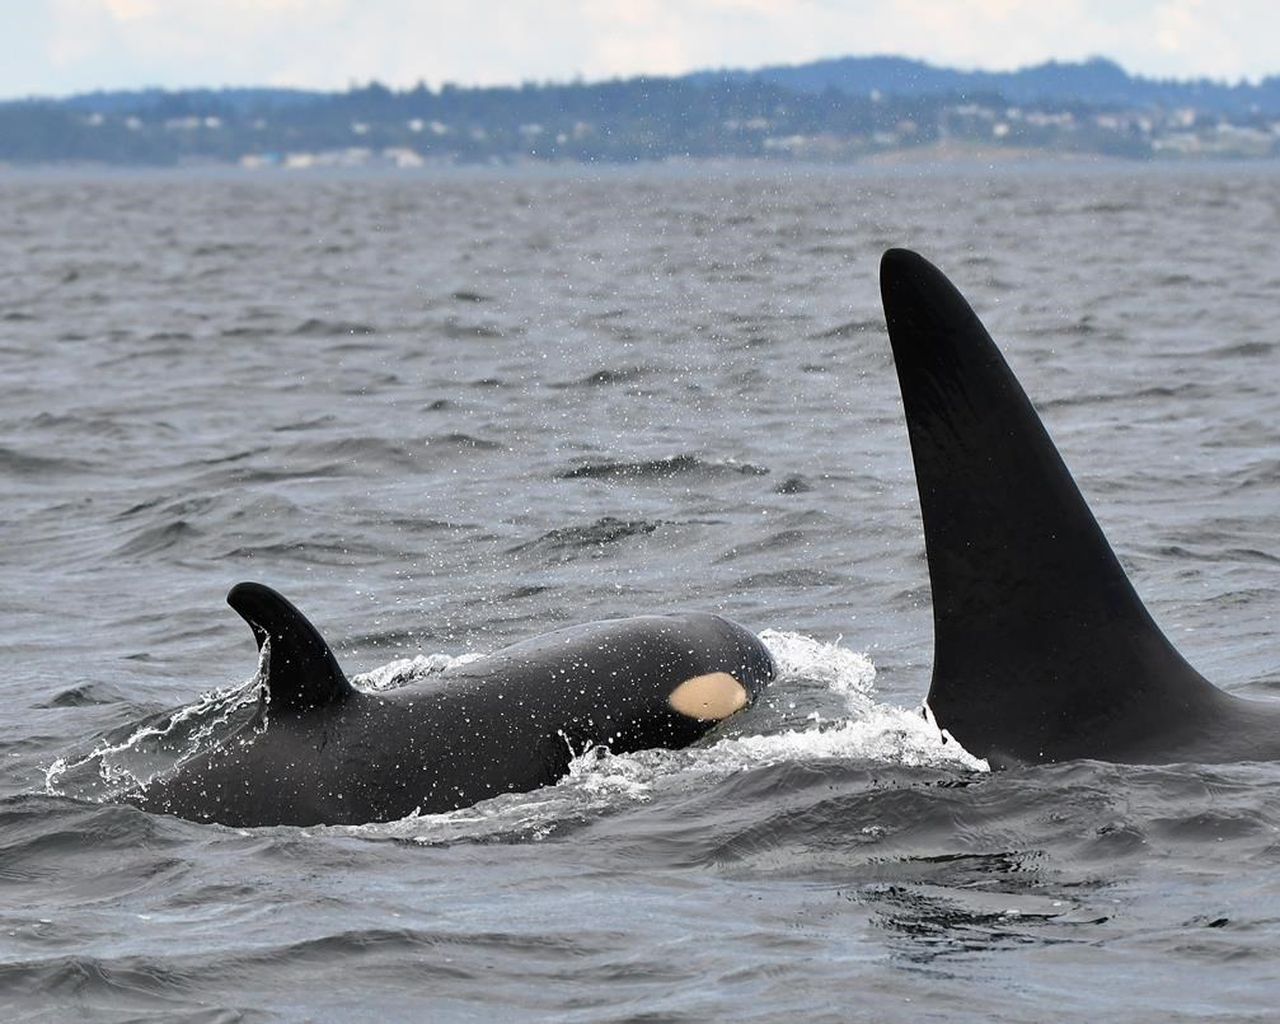 Researchers name newest baby orca spotted in bc waters the star